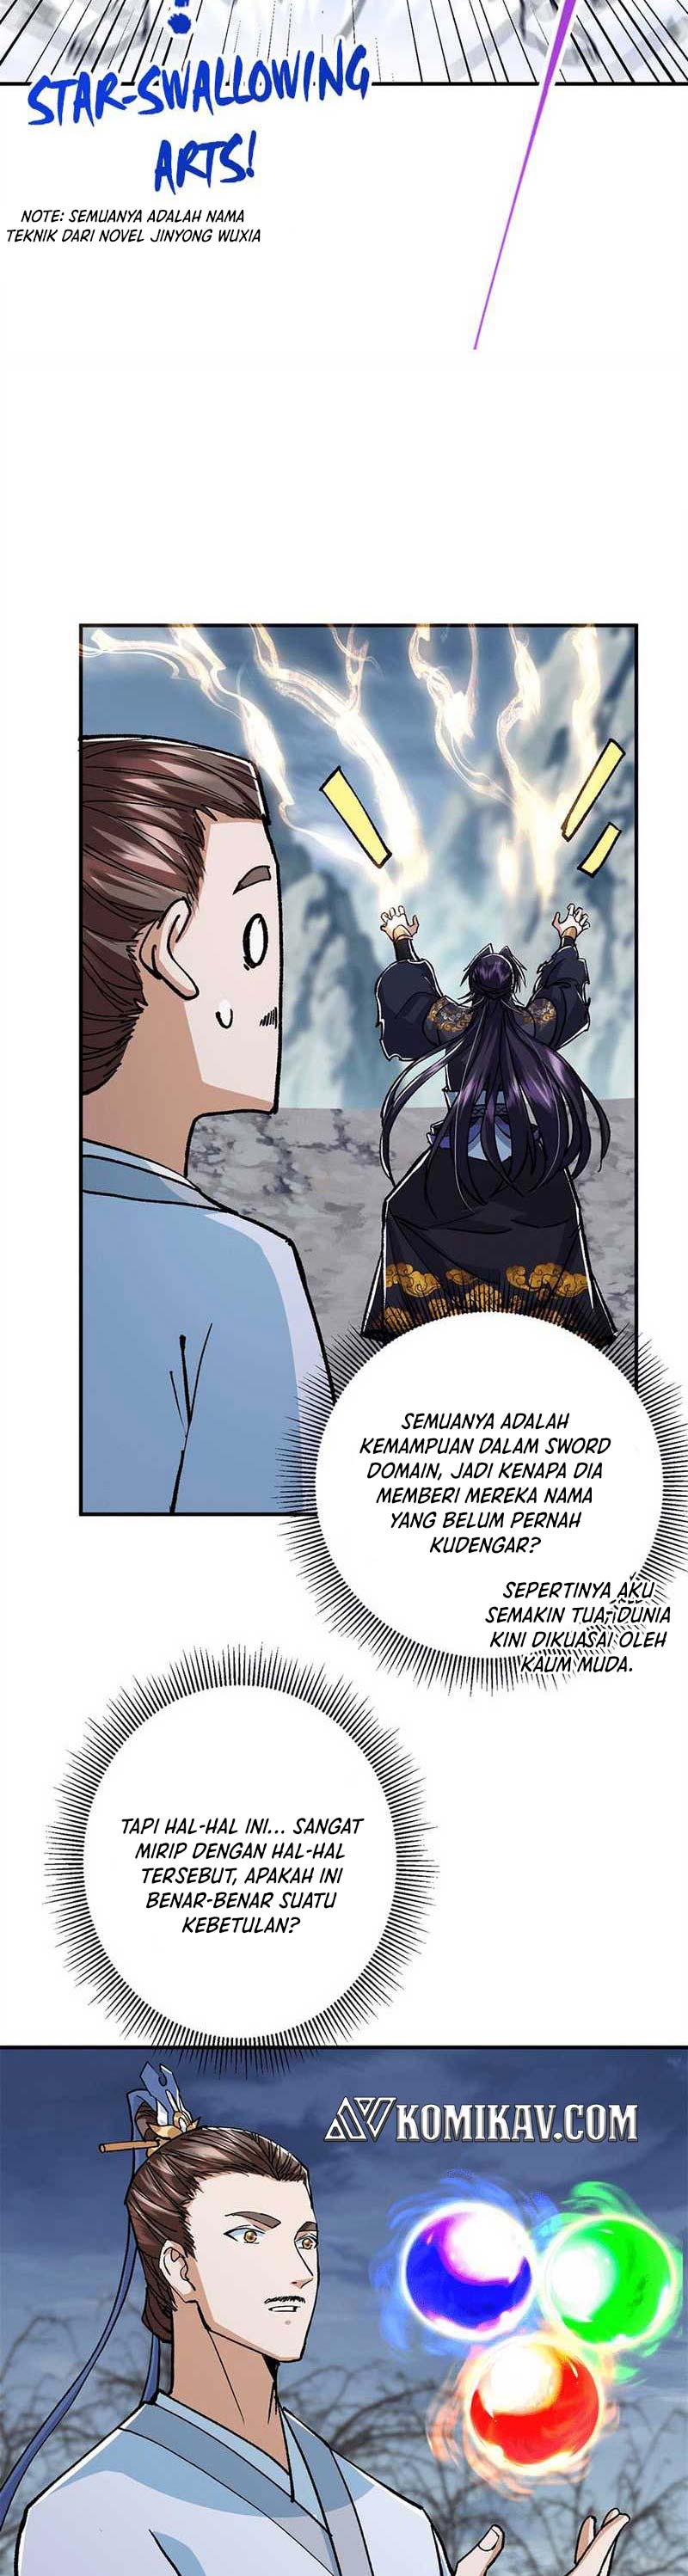 Keep A Low Profile, Sect Leader Chapter 307